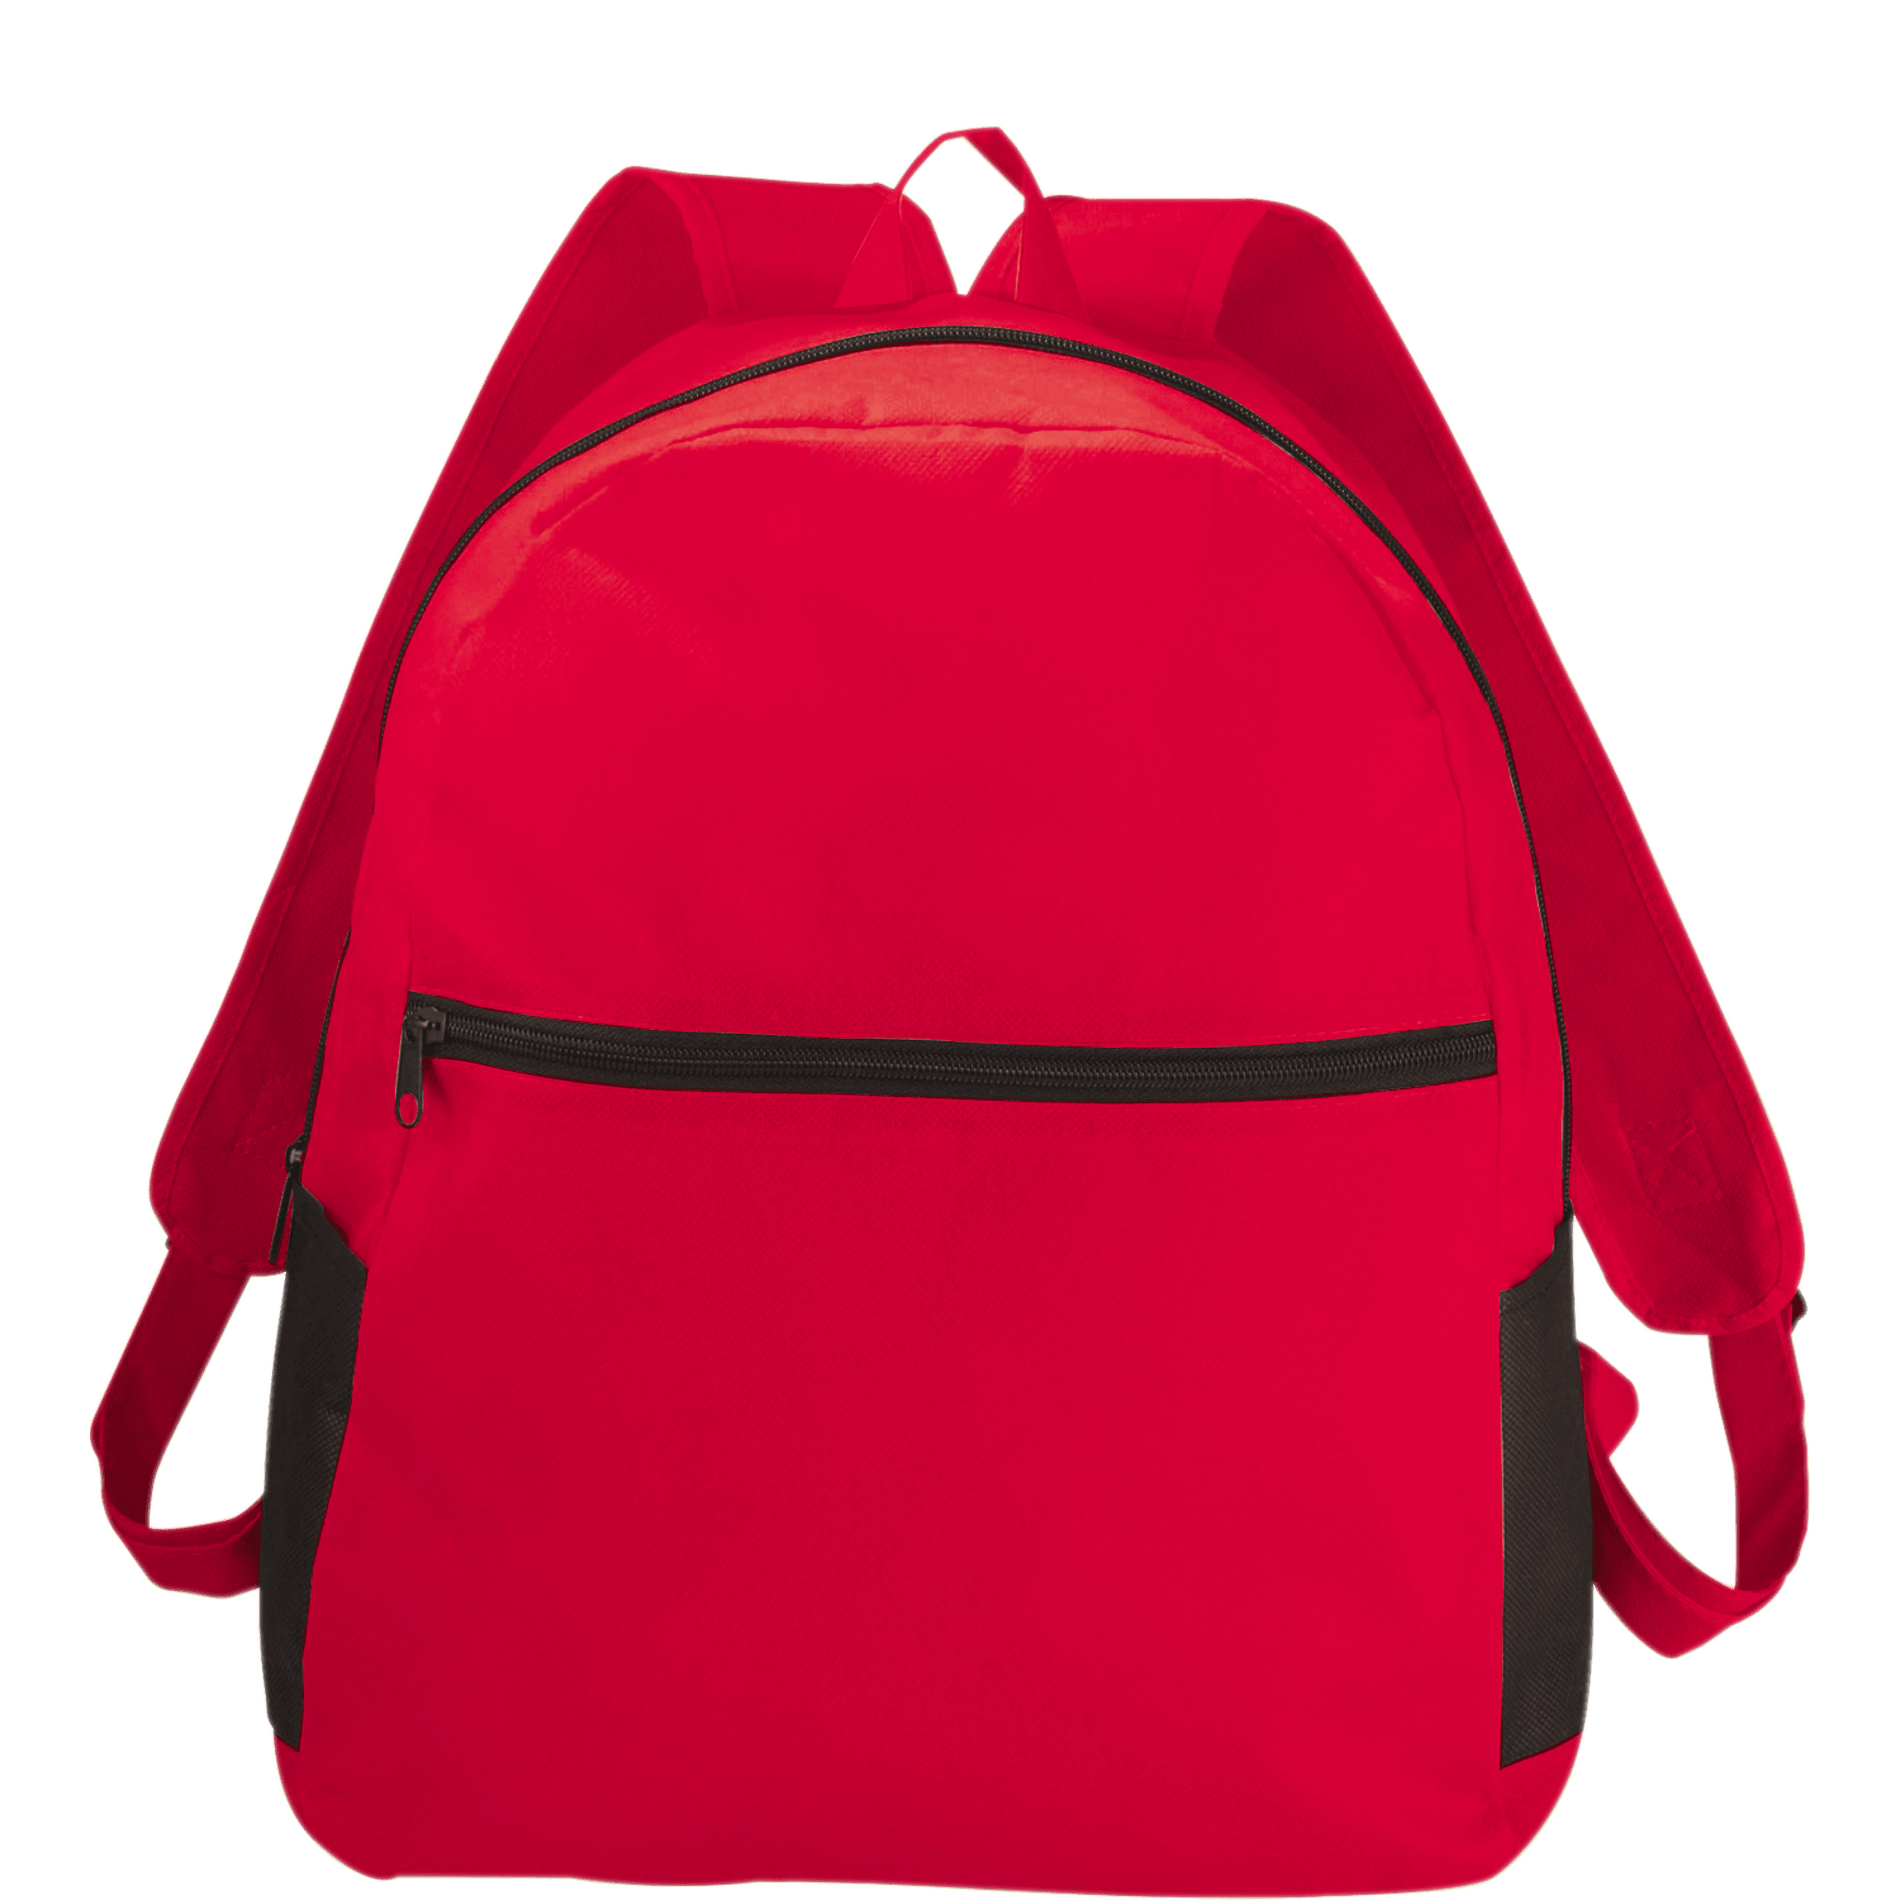 Bullet SM-7382 - Park City Budget Non-Woven Backpack